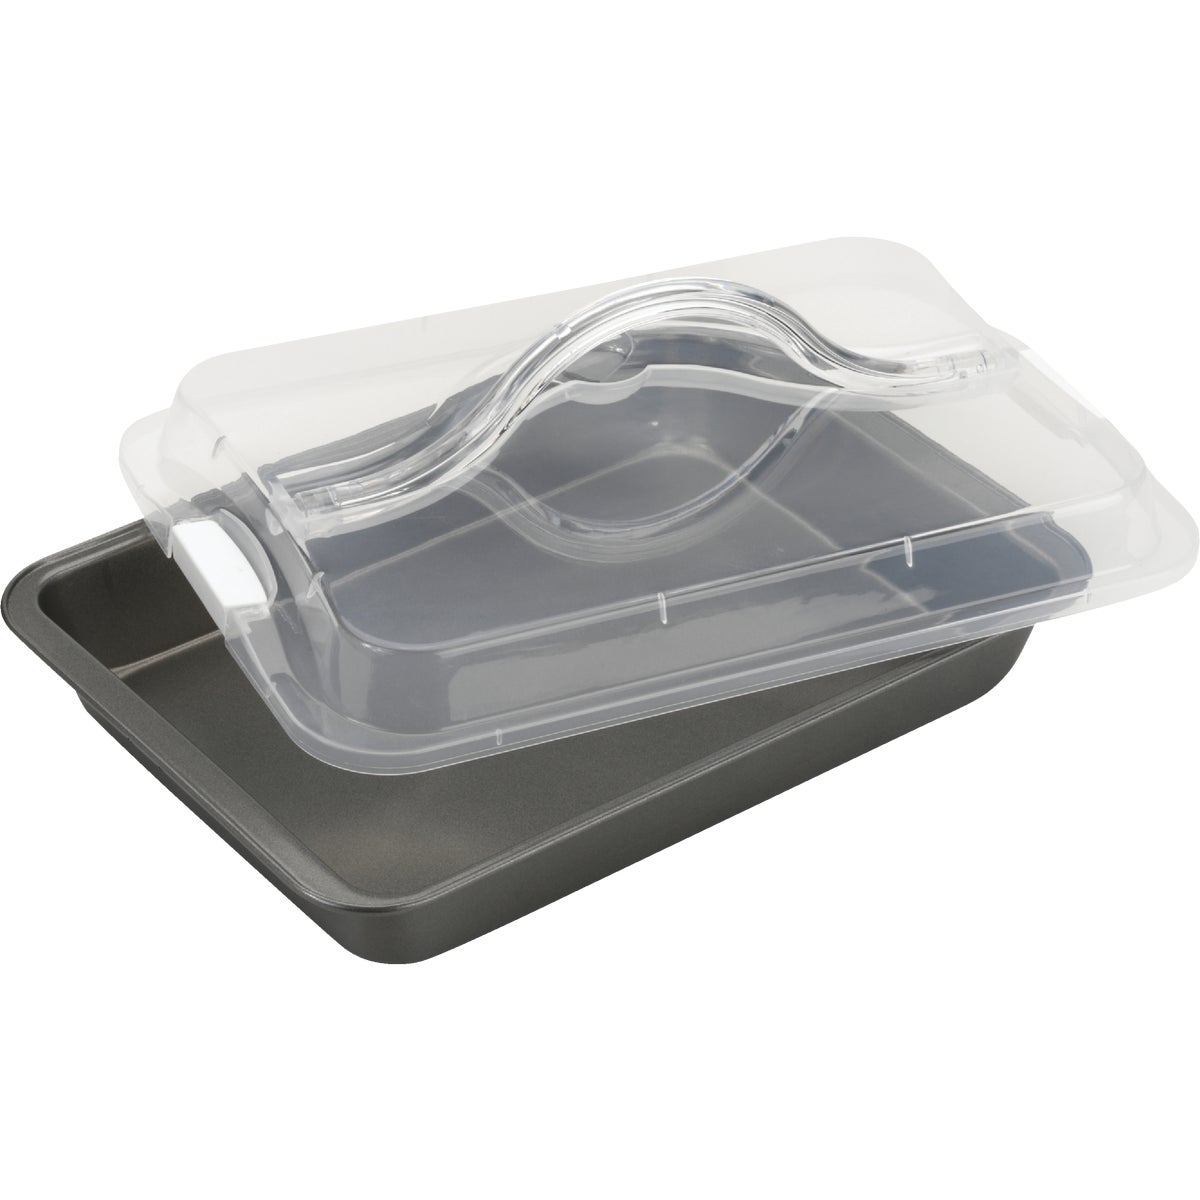 Item 603224, GoodCook covered cake pan is designed to distribute heat evenly and quickly